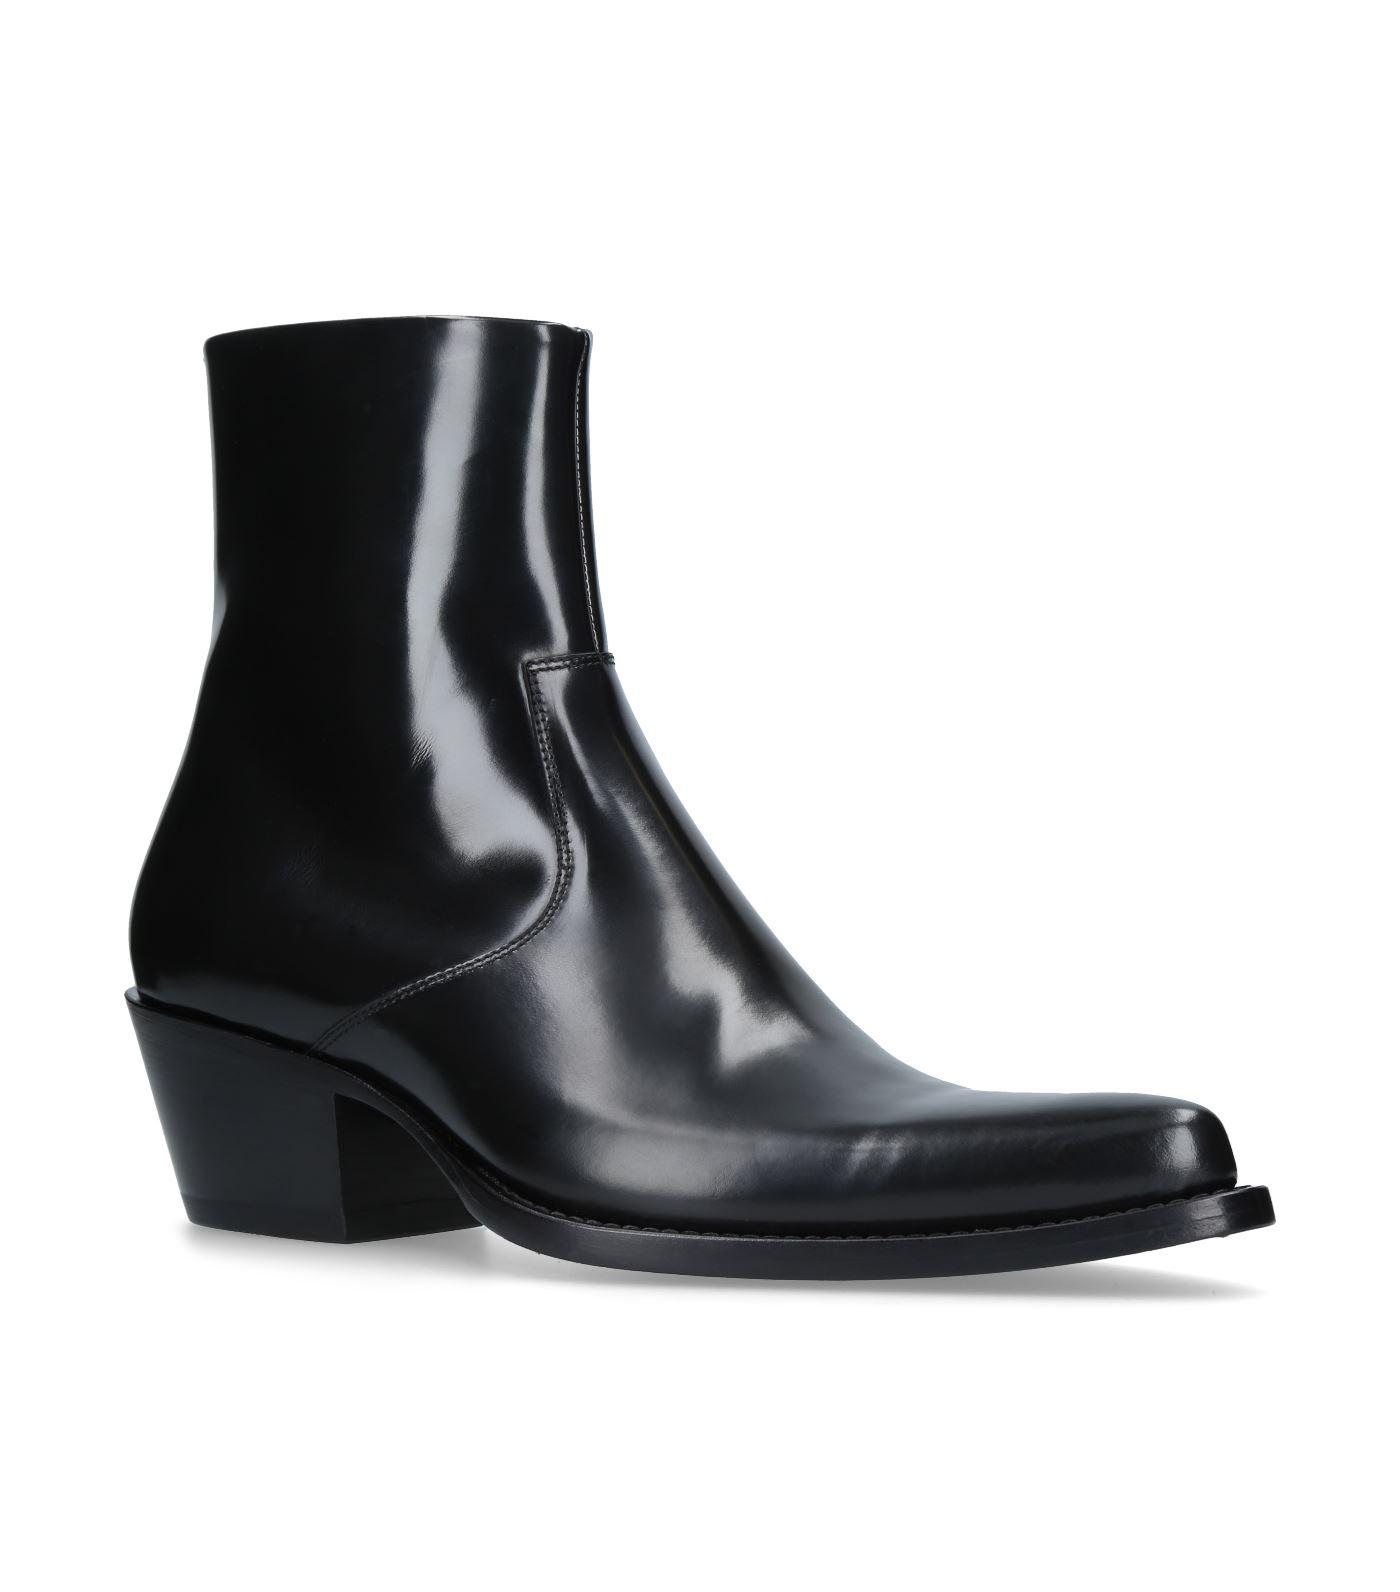 Calvin Klein 205w39nyc Chris Boots Offer Store, 64% OFF | asrehazir.com